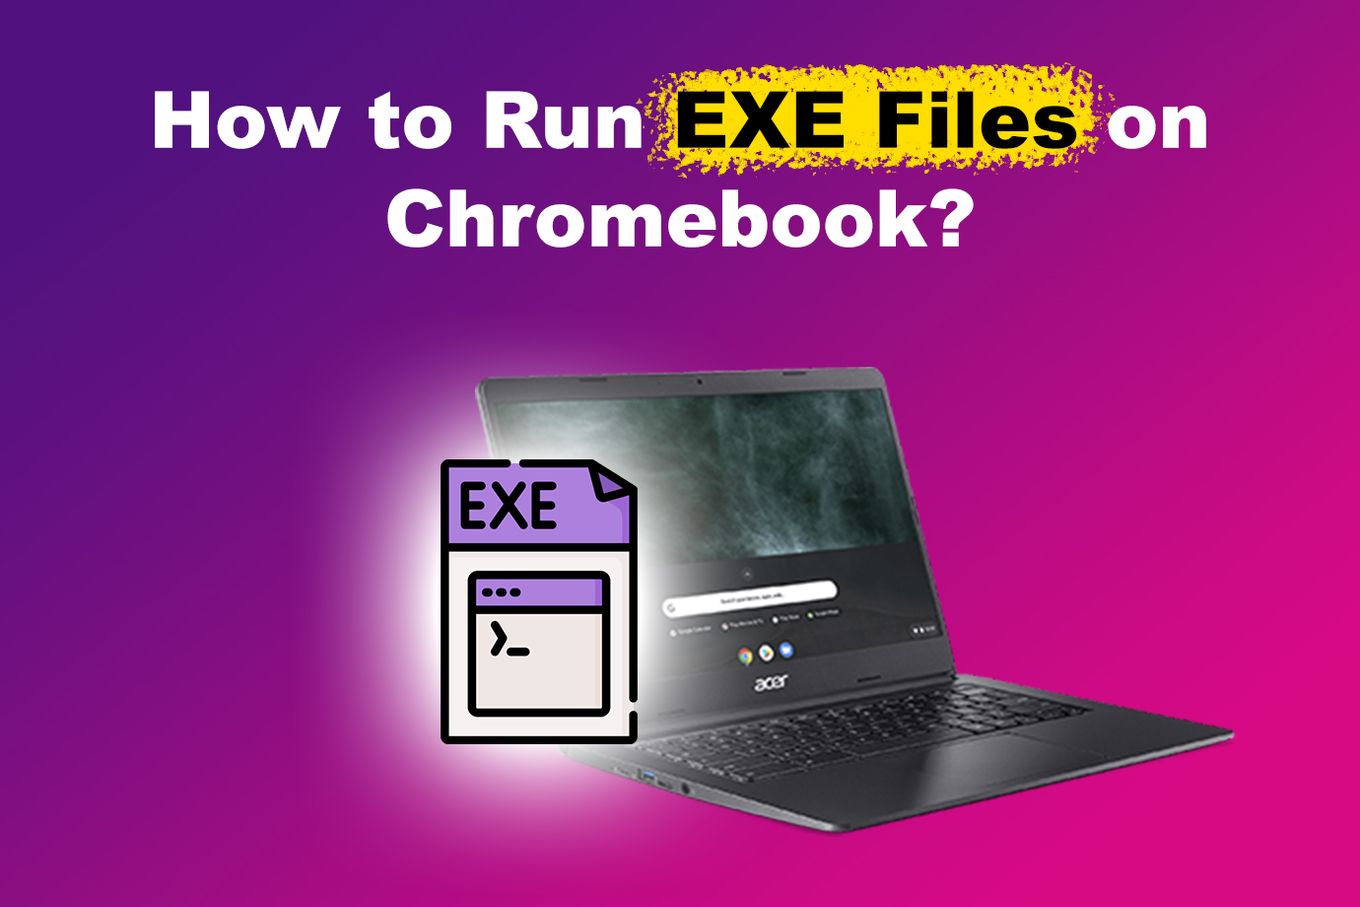 How to run exe files on Chromebook